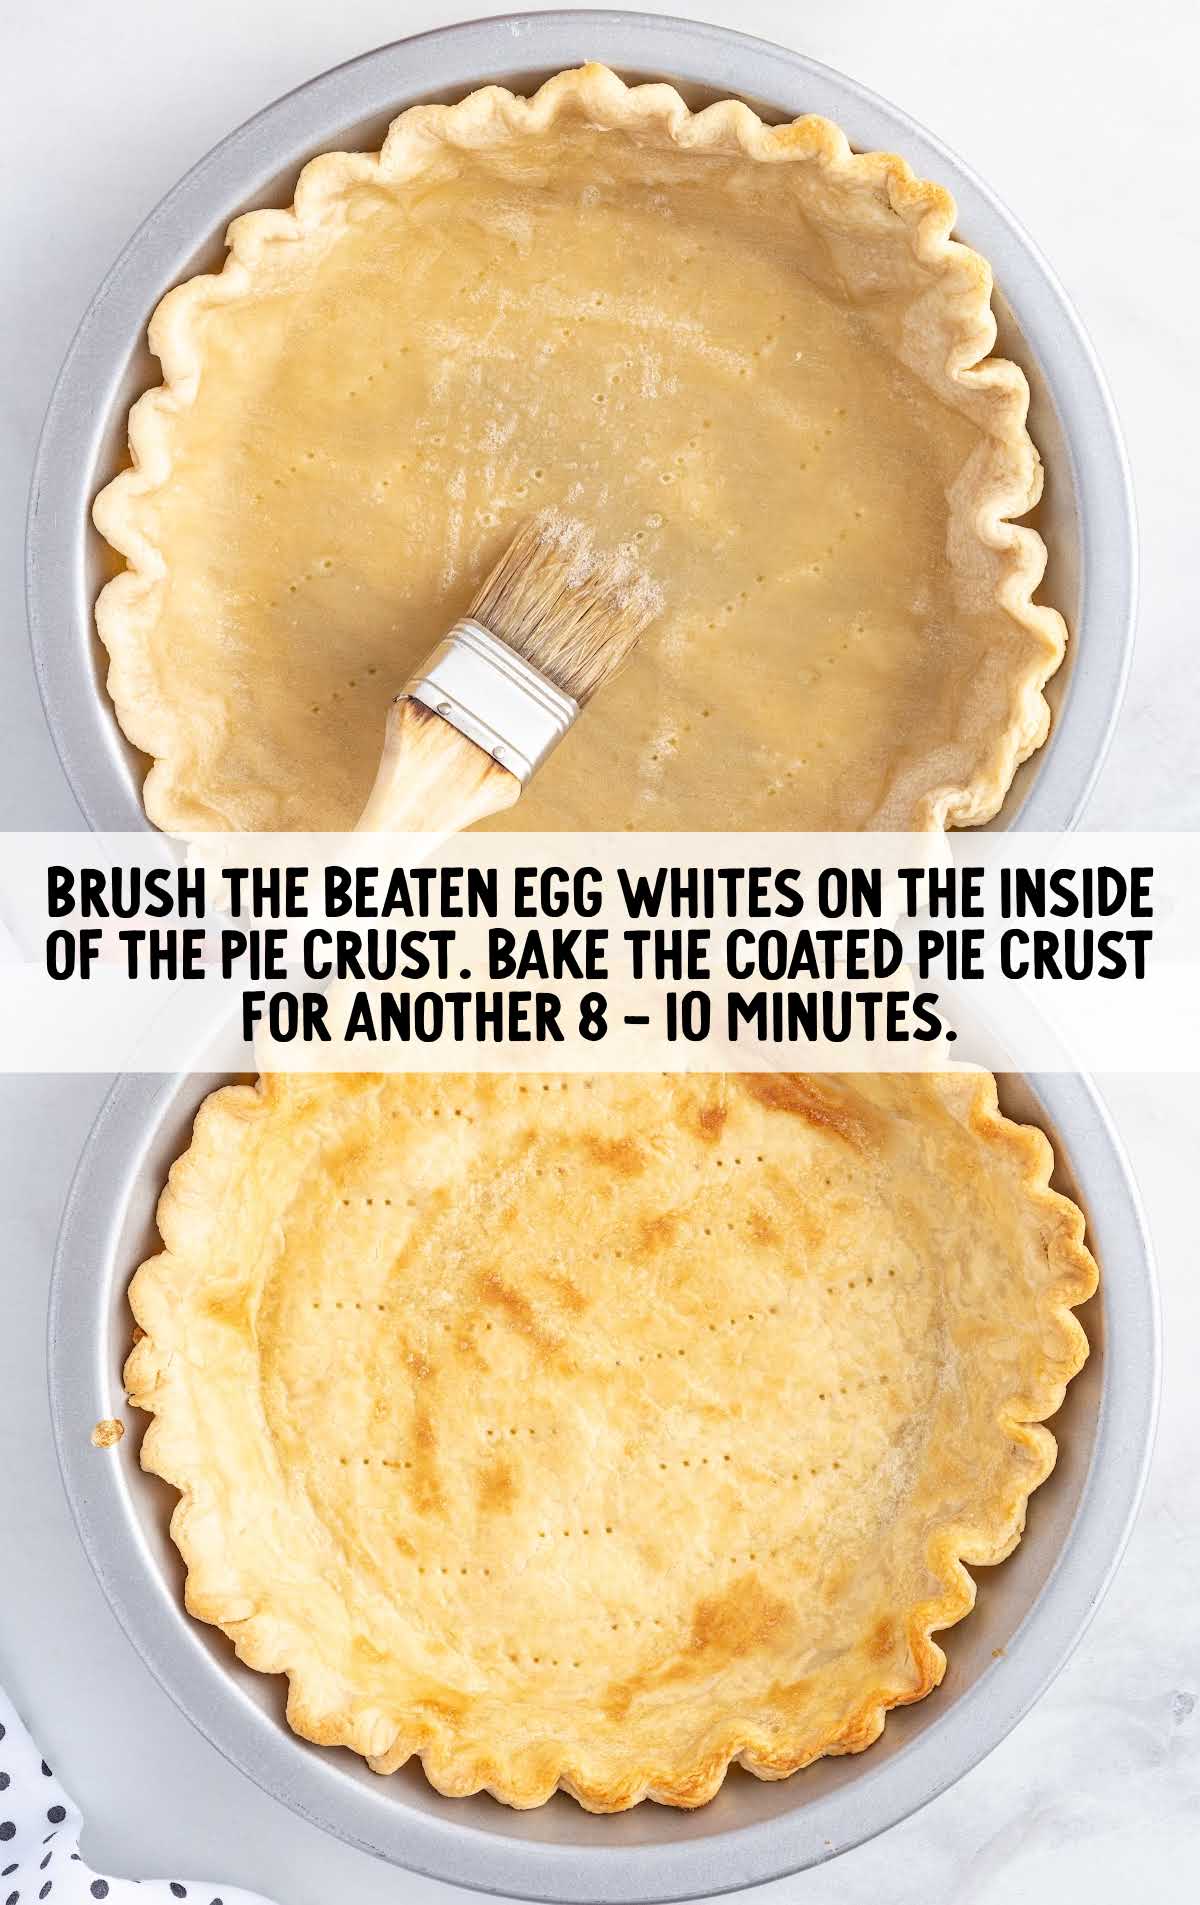 egg whites brushed on the inside of the pie crust in a a pie dish